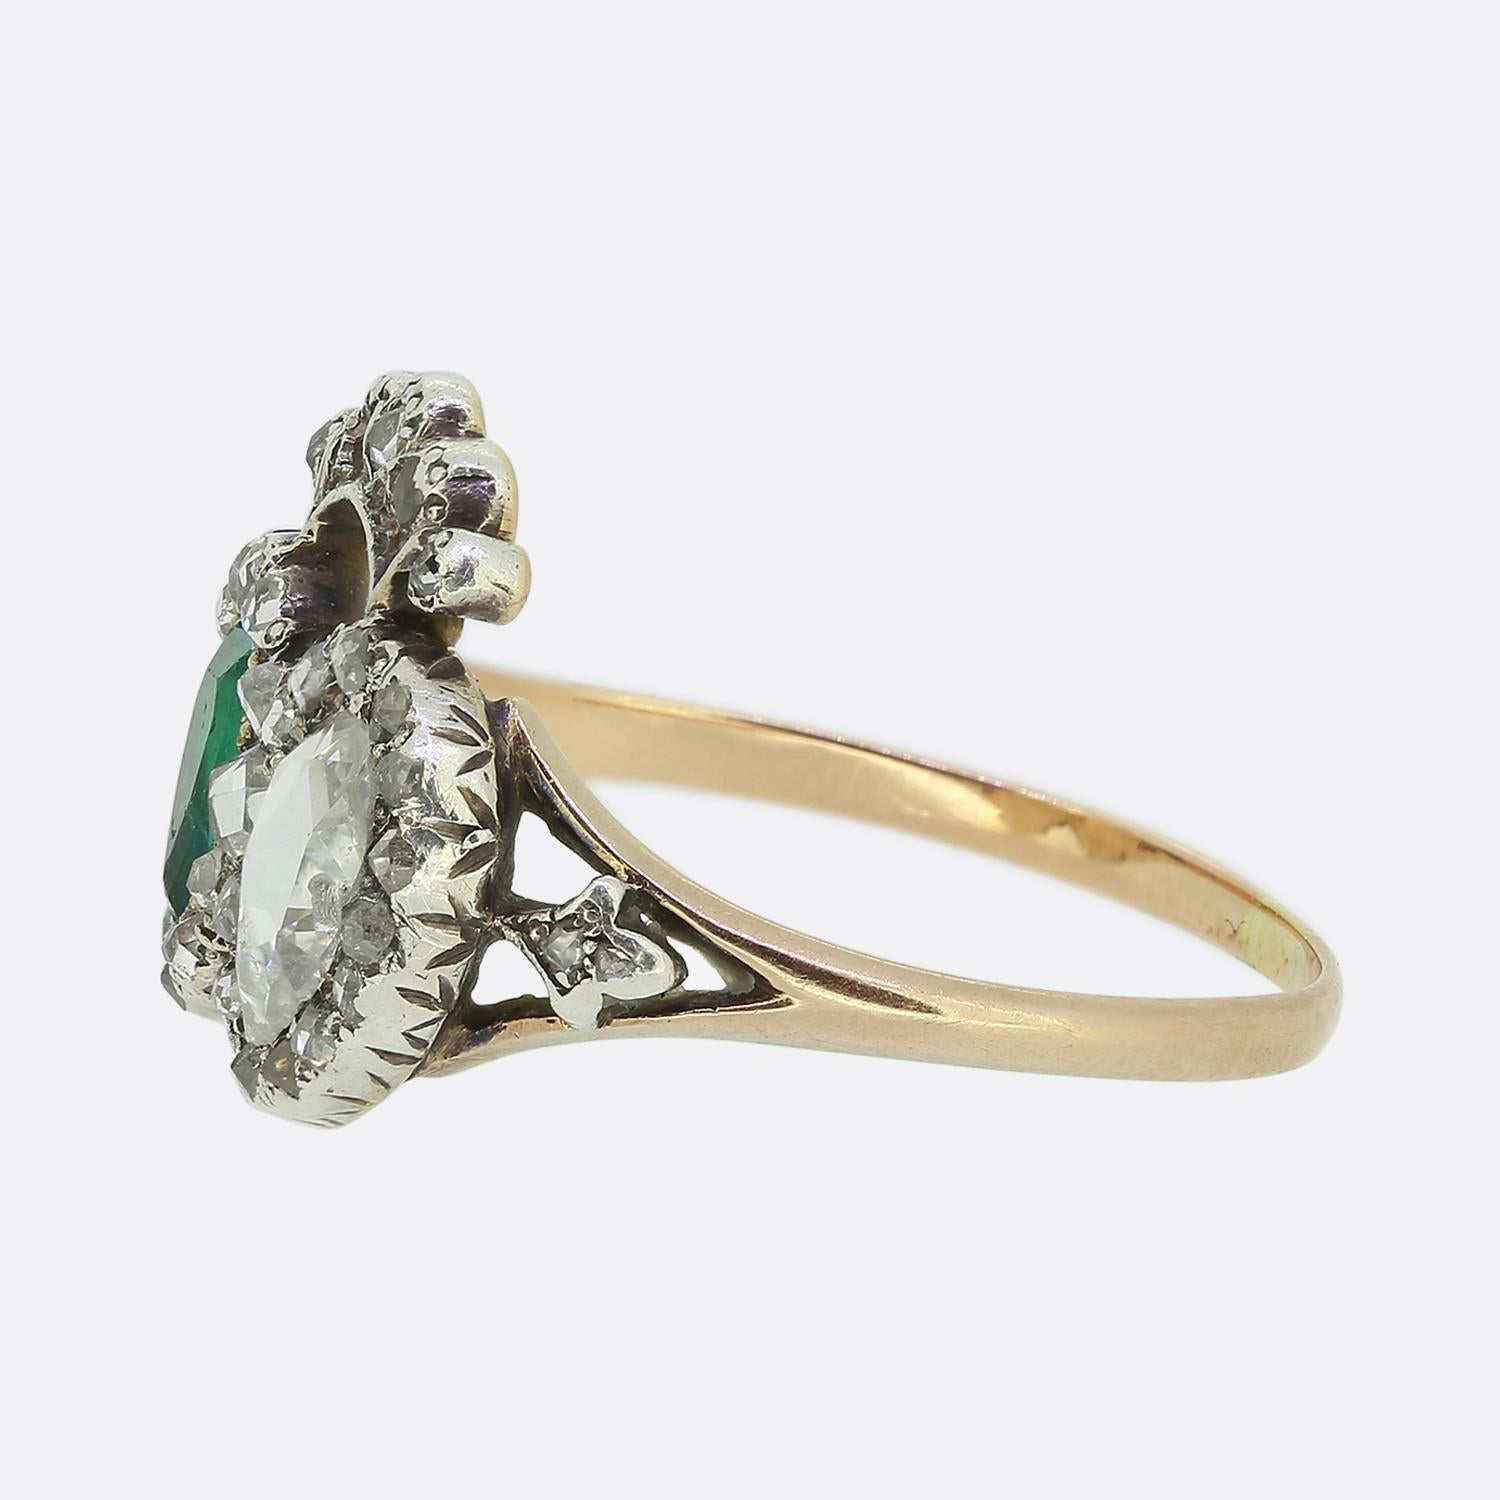 Here we have a delightful double heart ring taken from the Georgian era. This romantic piece showcases a duo of expertly cut pear shaped precious gemstones including an electric green emerald and a bright white chunky rose cut diamond. Both natural